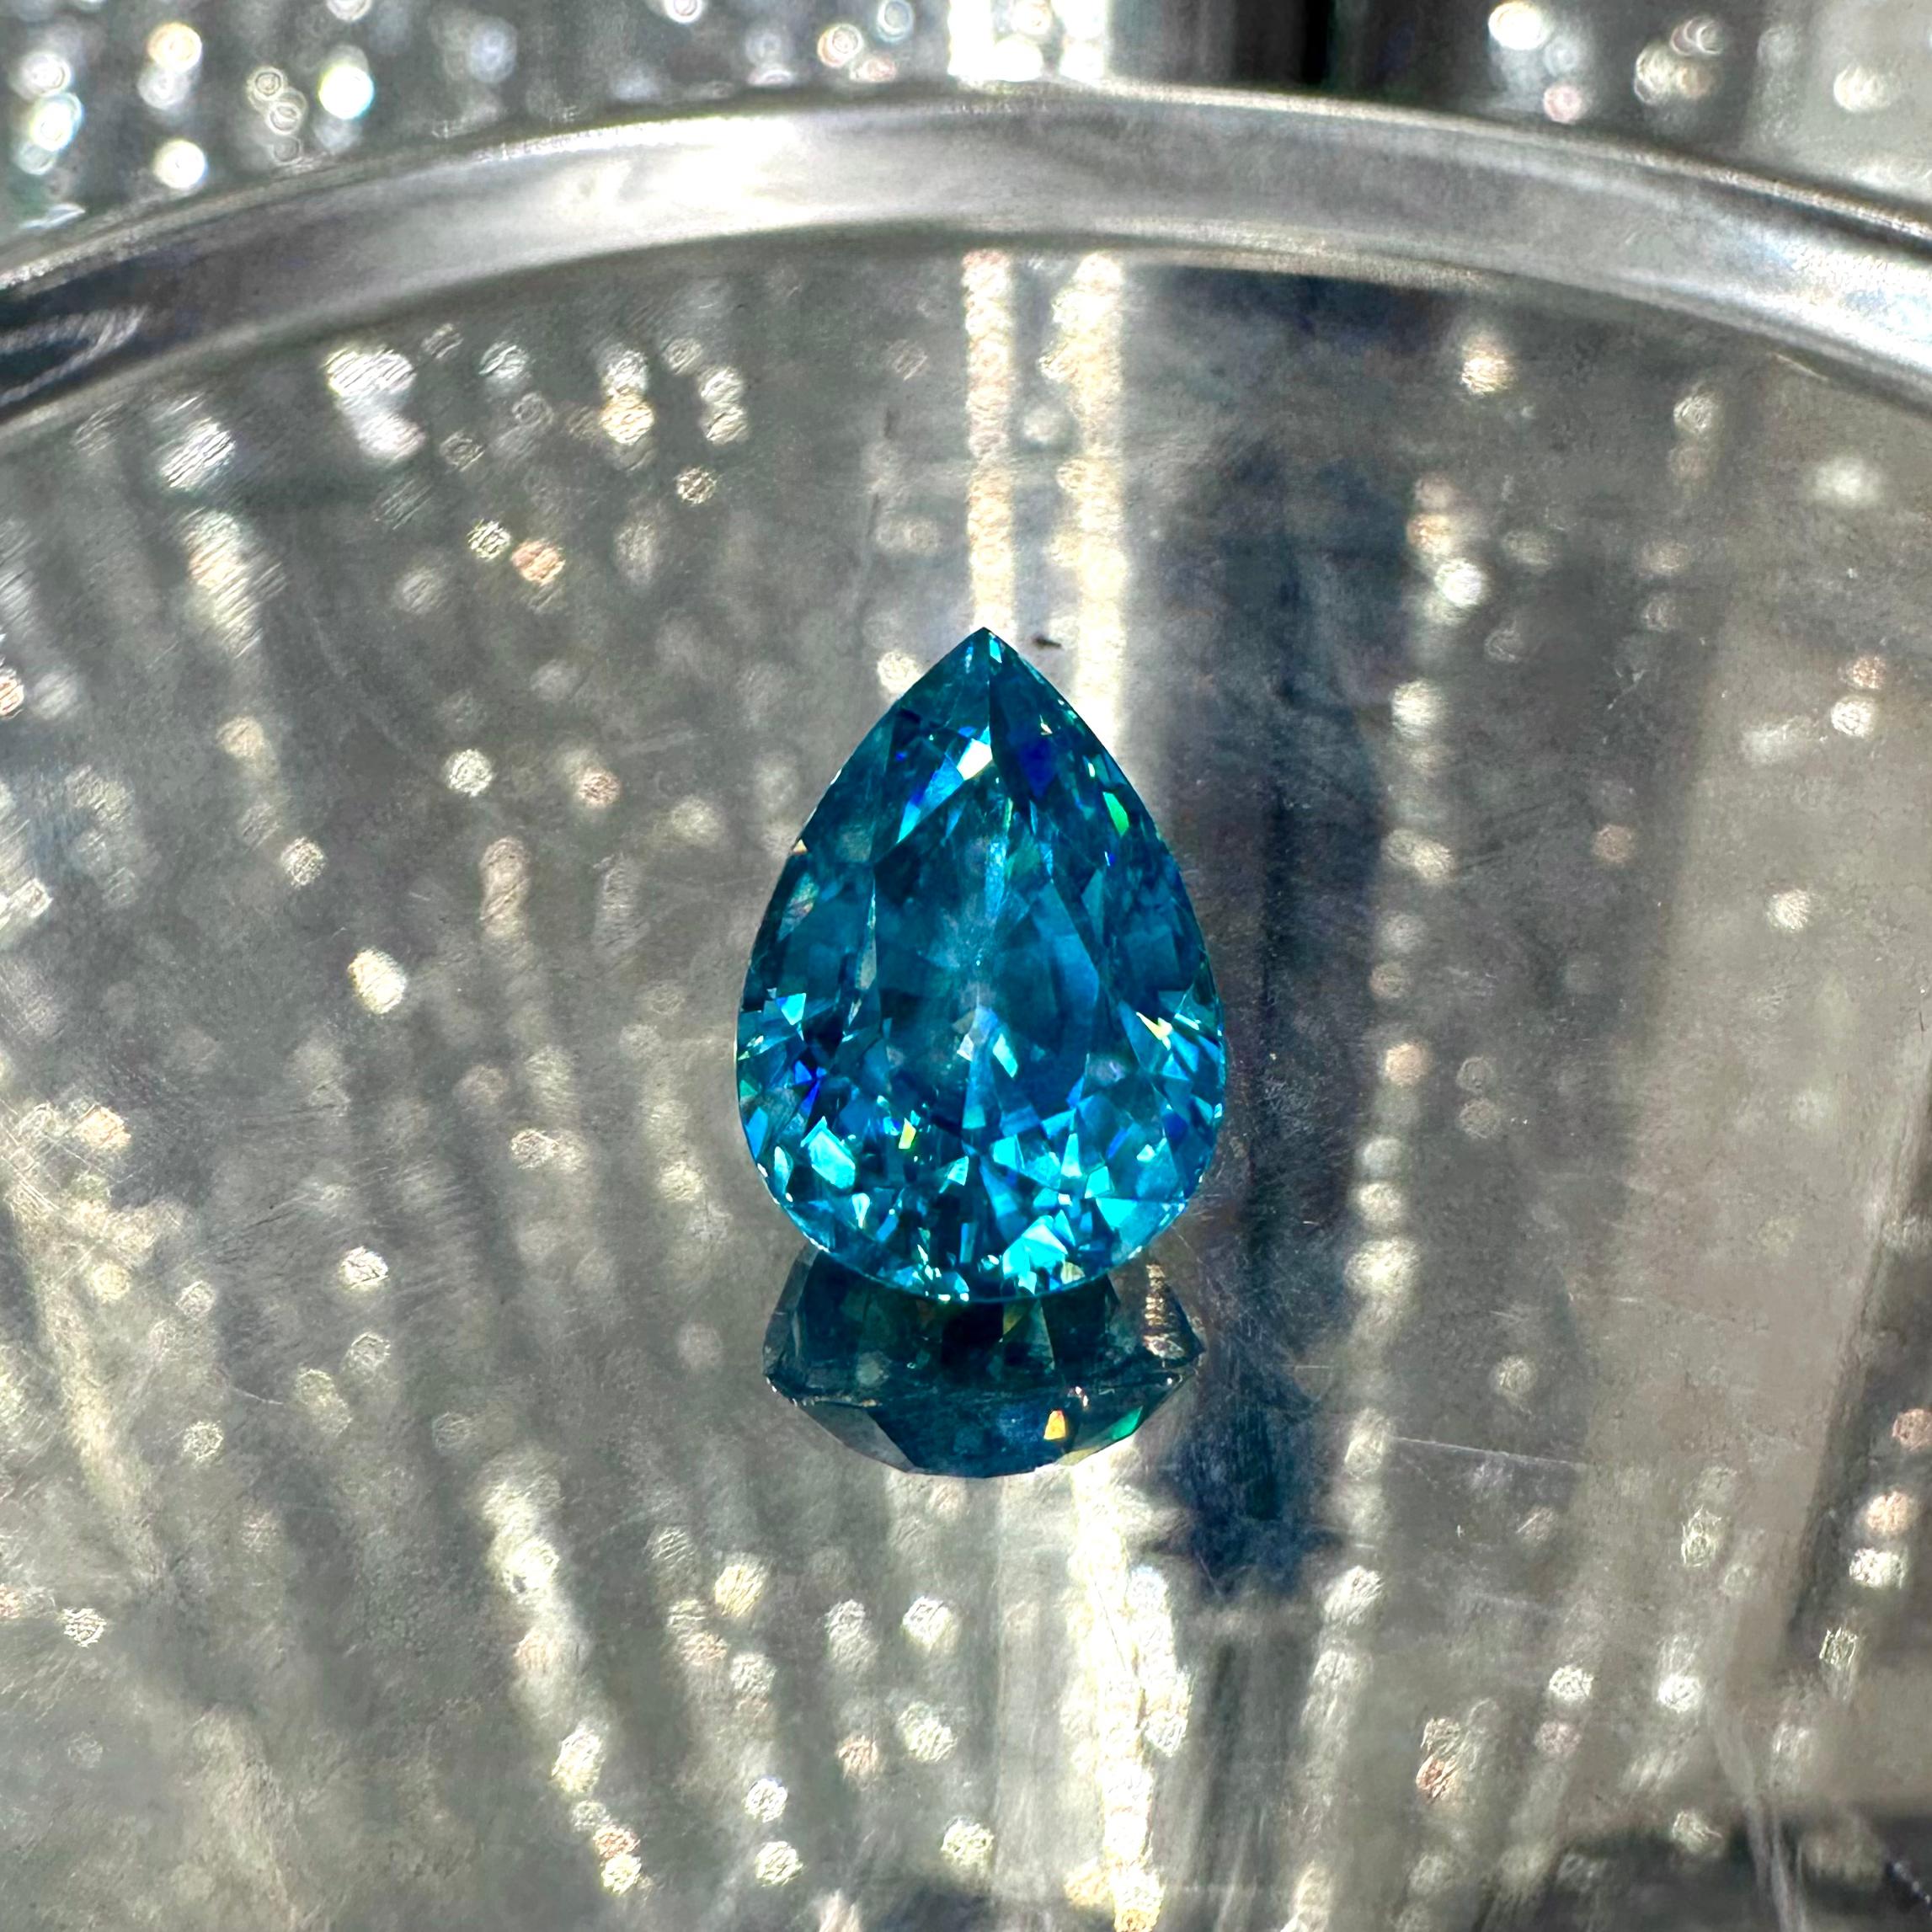 Probably my favorite gem in the studio right now (although that is like choosing a favorite child!!), this stunning pear shaped Blue Zircon is a wonder! 
Blue Zircon (the true birthstone for December) is a natural gemstone... The neat thing about